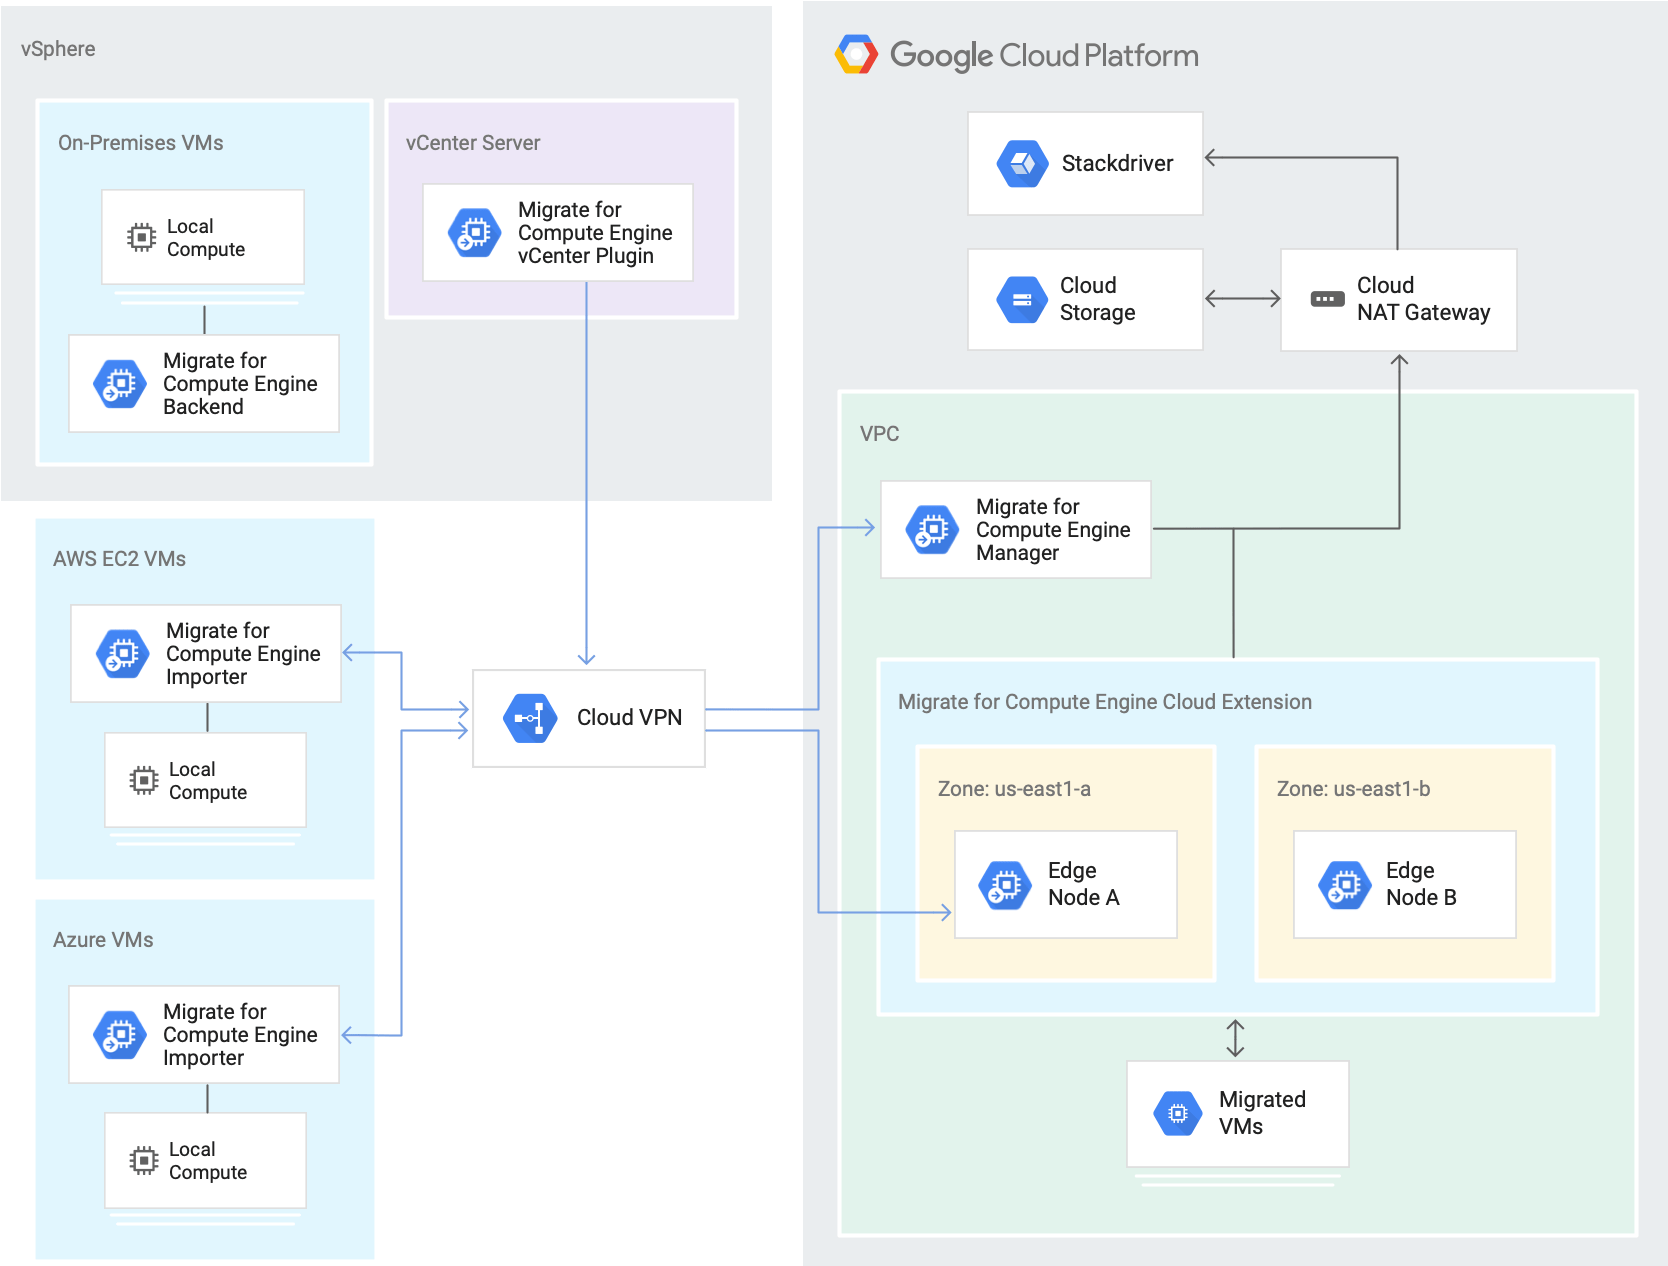 Migrate for Compute Engine Architecture, showing all components of the infrastructure